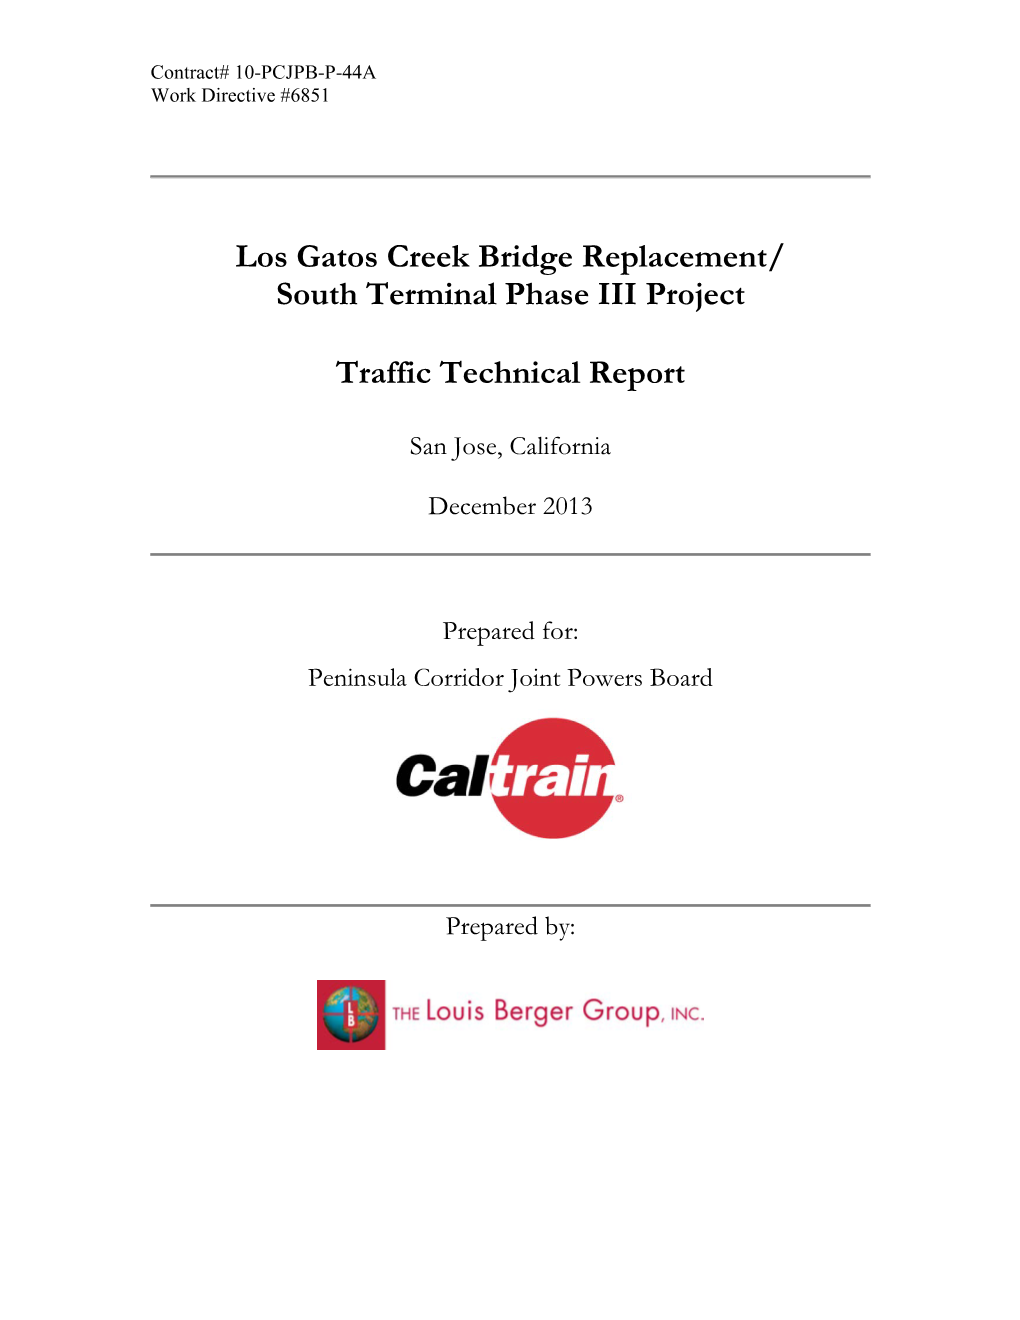 Los Gatos Creek Bridge Replacement/ South Terminal Phase III Project